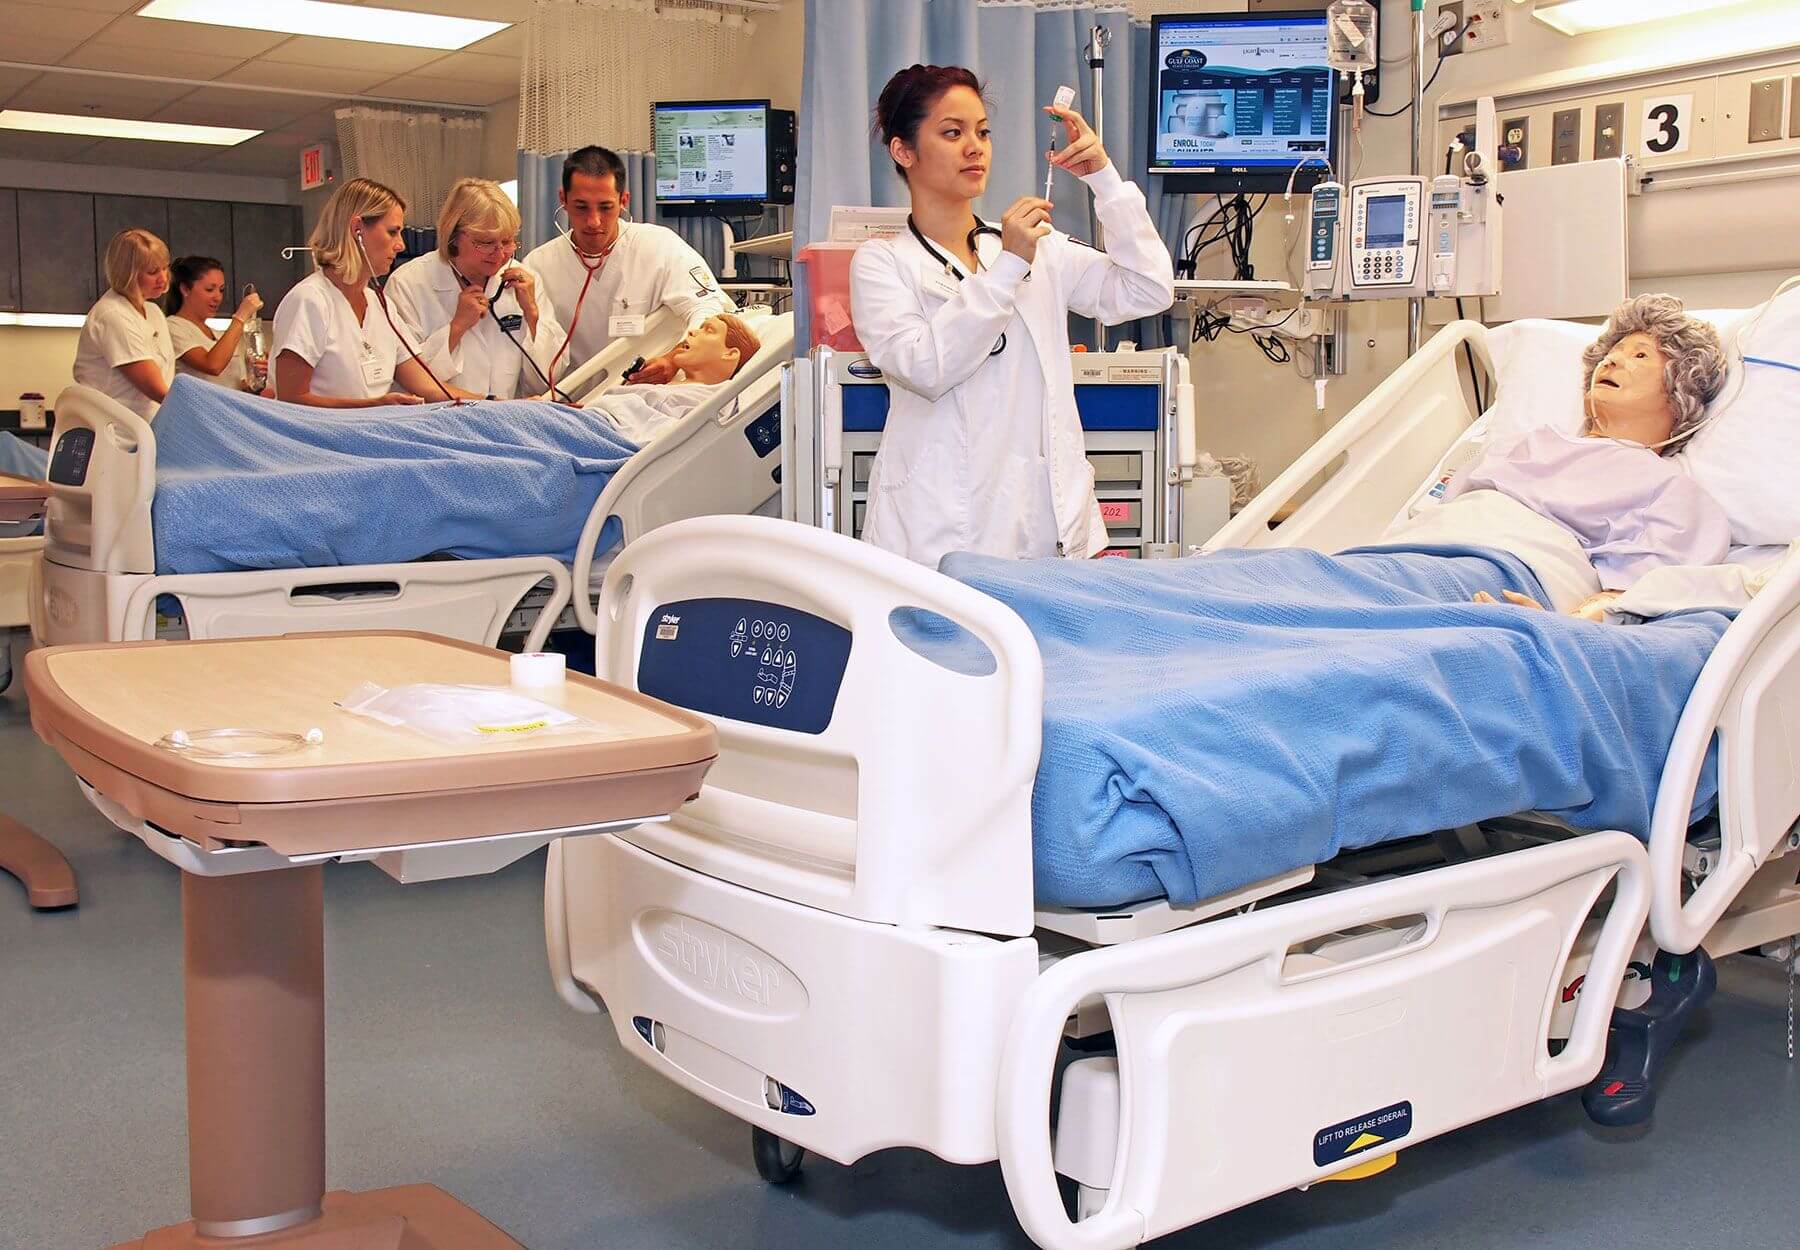 Nursing students practice administering care to patients.